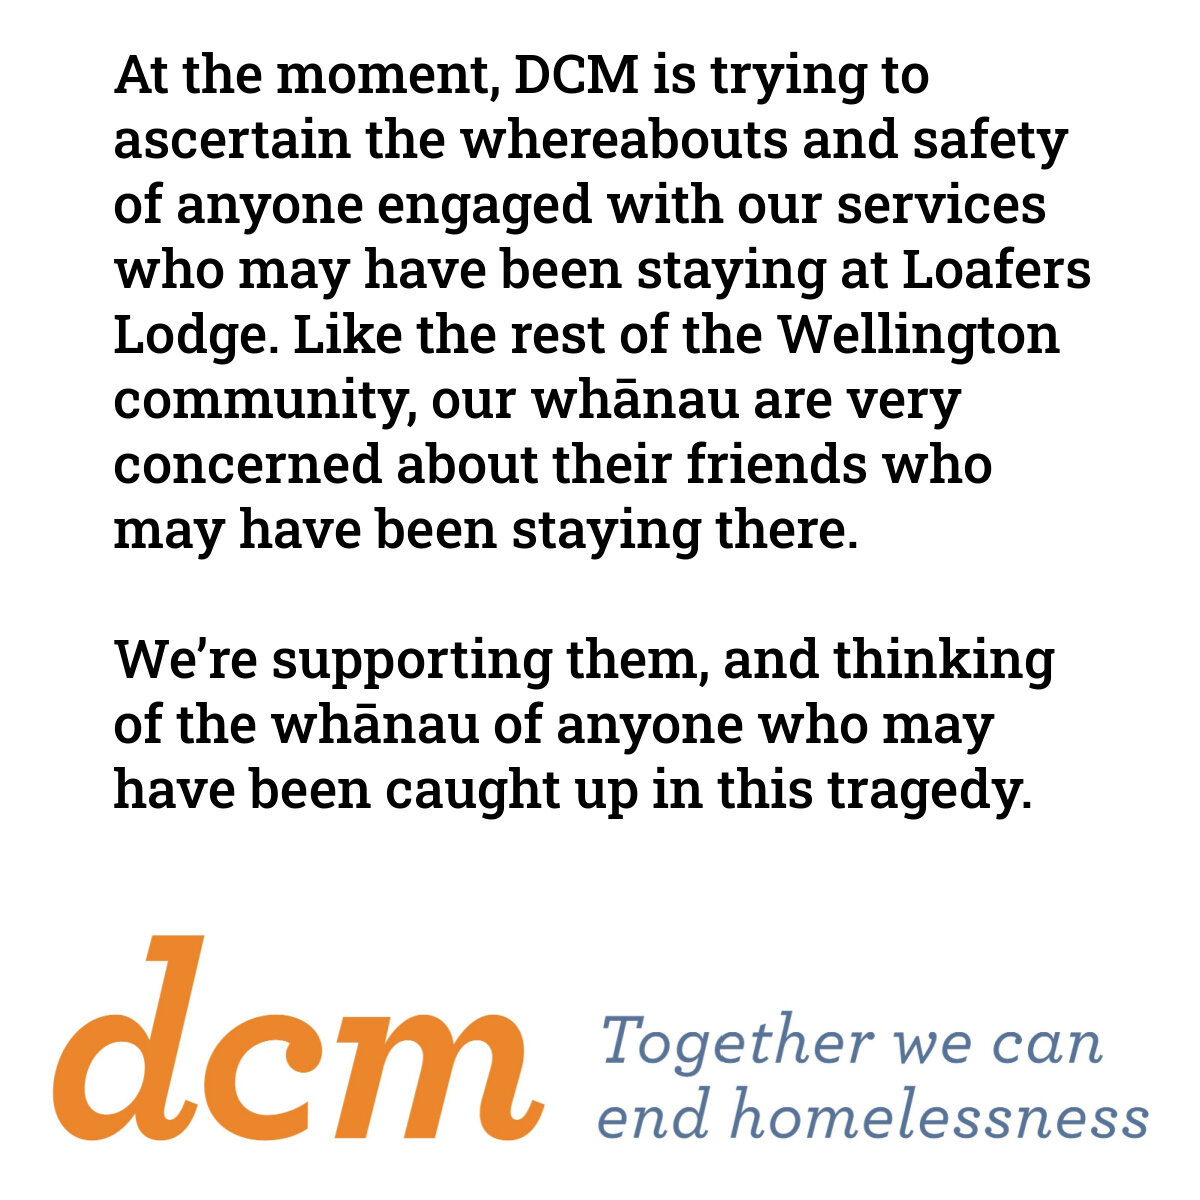 At the moment, DCM is trying to ascertain the whereabouts and safety of anyone engaged with our services who may have been staying at Loafers Lodge. Like the rest of the Wellington community, our whānau are very concerned about their friends who may 